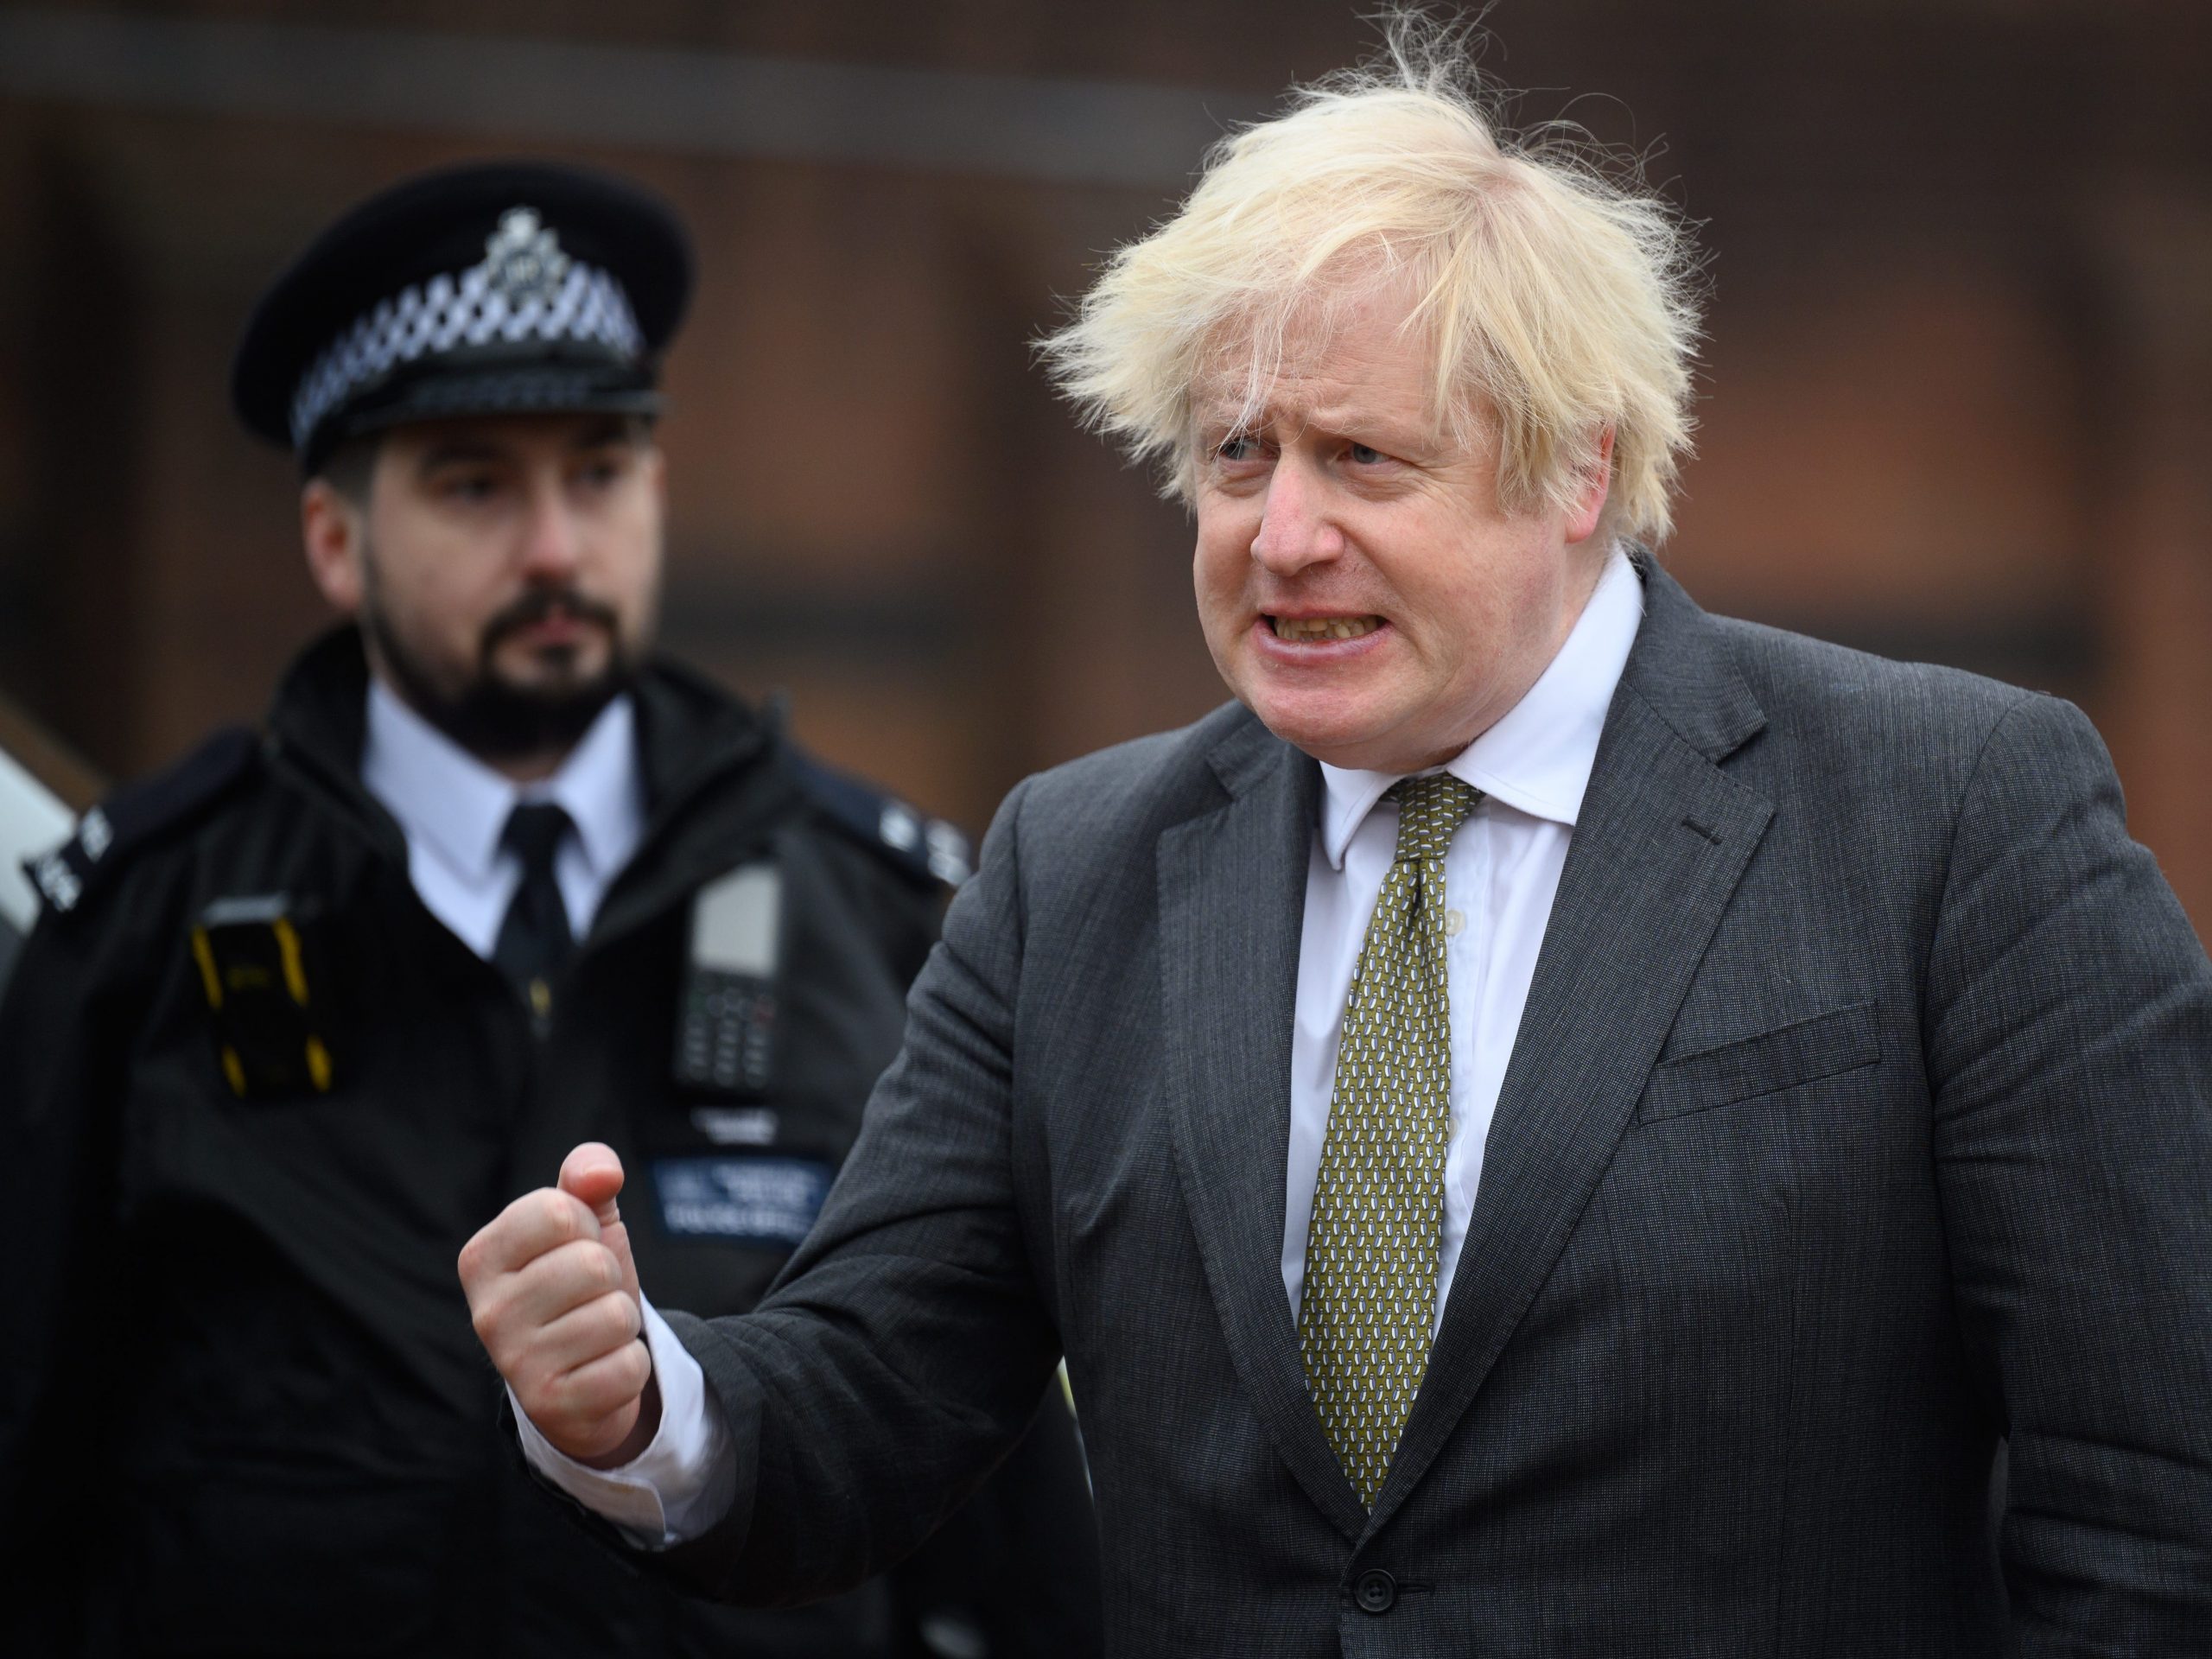 Boris Johnson at Uxbridge police station grimacing with an officer behind him